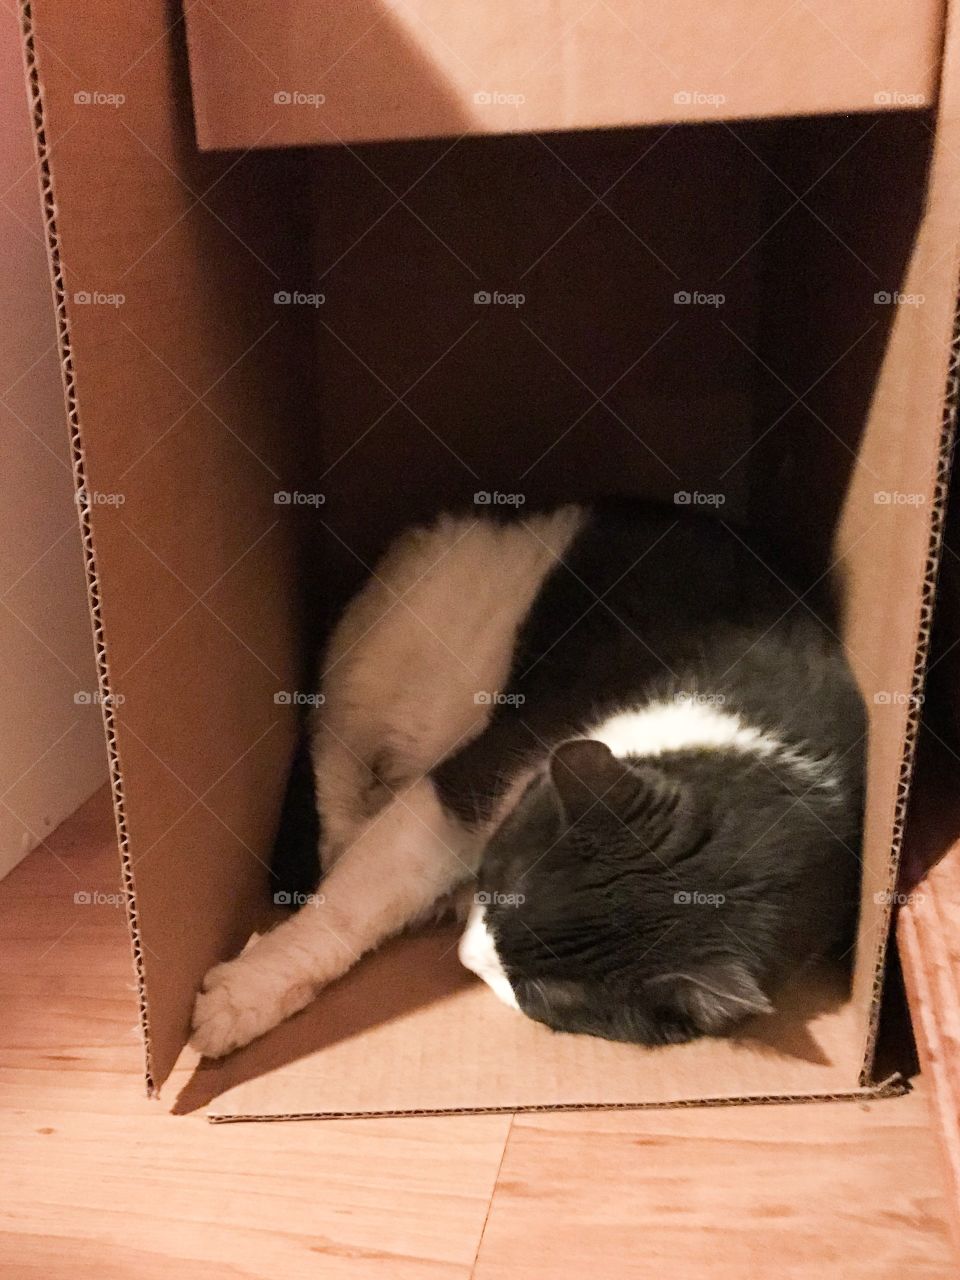 Cat in a box. There may be cat beds, our beds, laundry piles, soft furniture but really, what’s better than a box! Even my 23lb polar bear cat can find a box big enough for him to snuggle into! Way to go Sal!